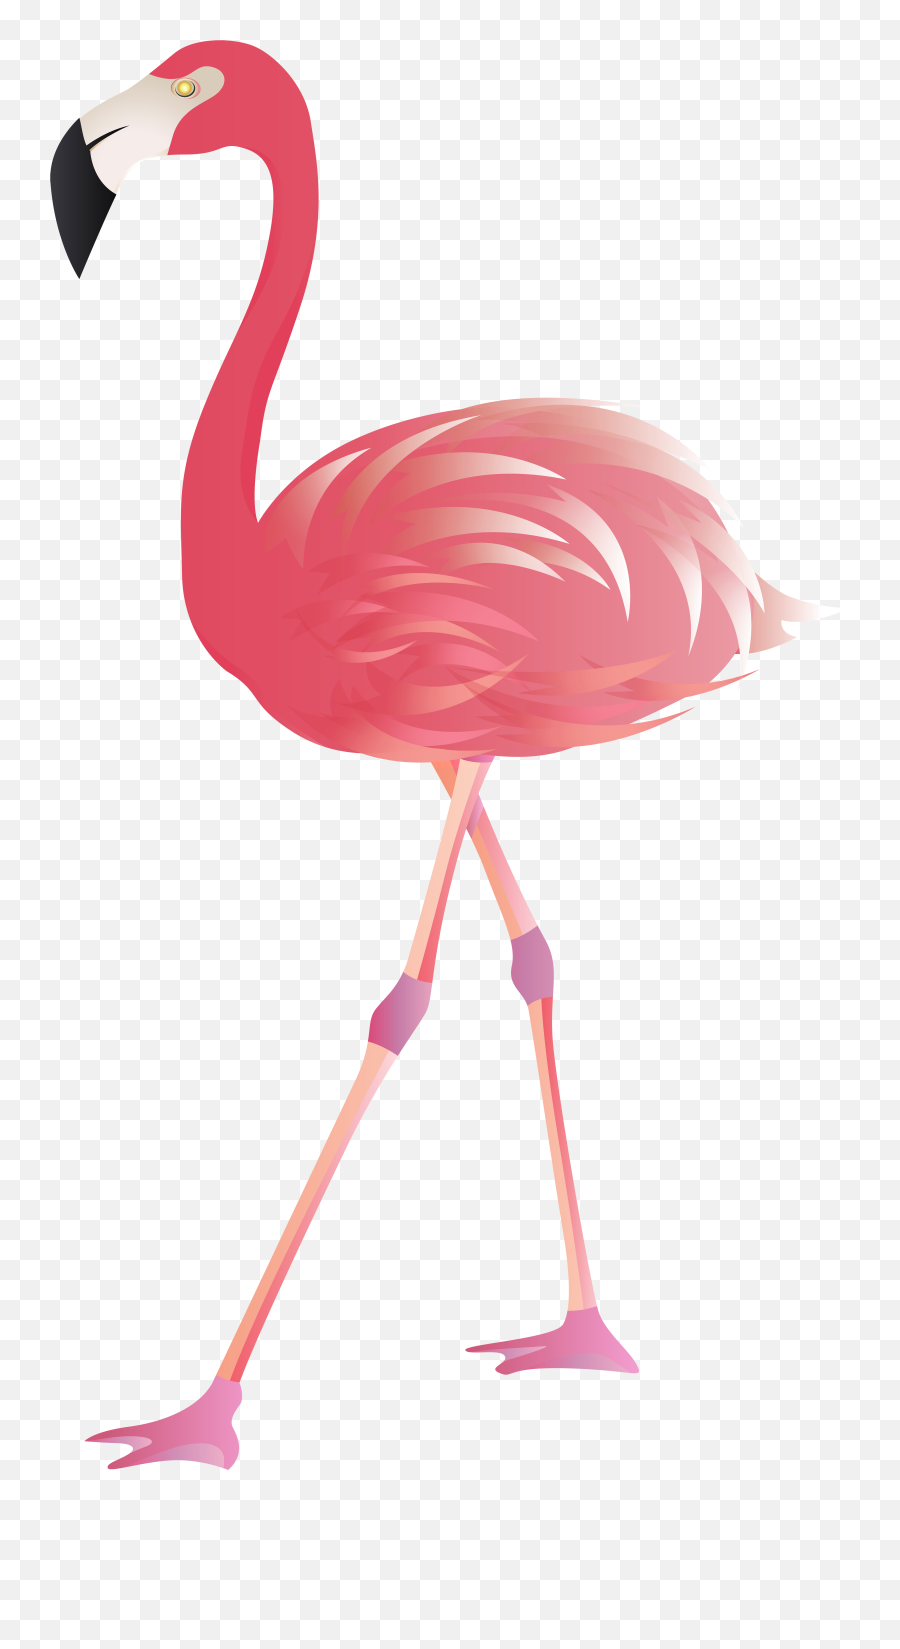 View Full Size Flamingo Png - Transparent Background Flamingo Png,Flamingo Transparent Background